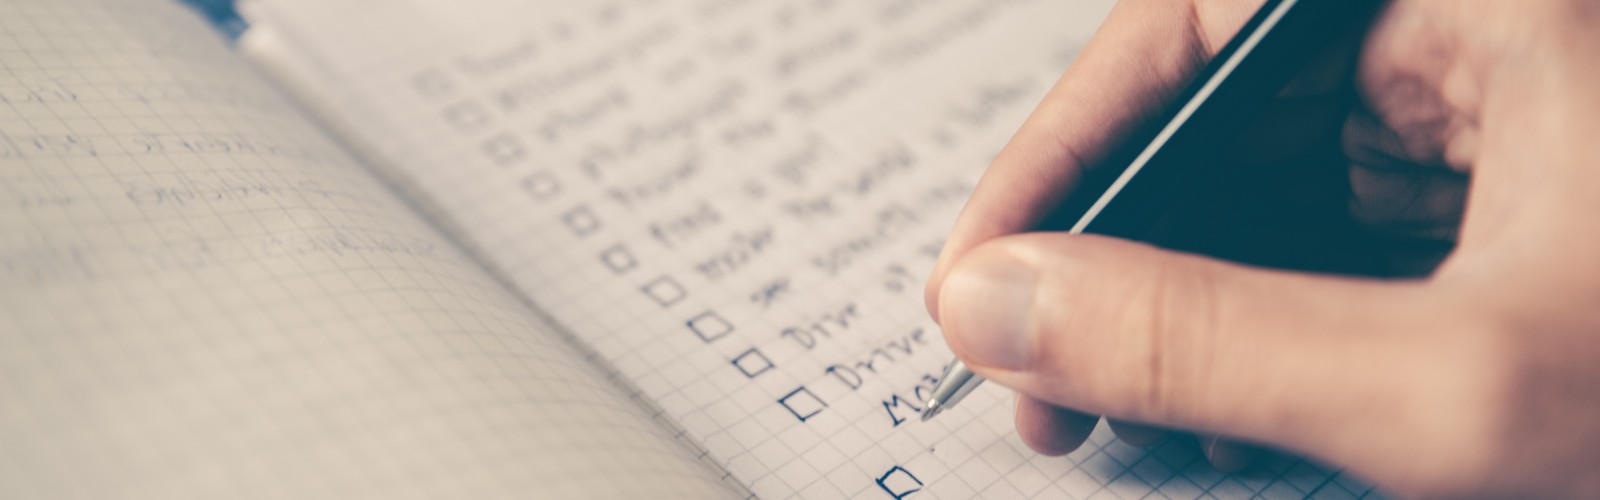 Photo of a hand writing down a checklist in a notebook